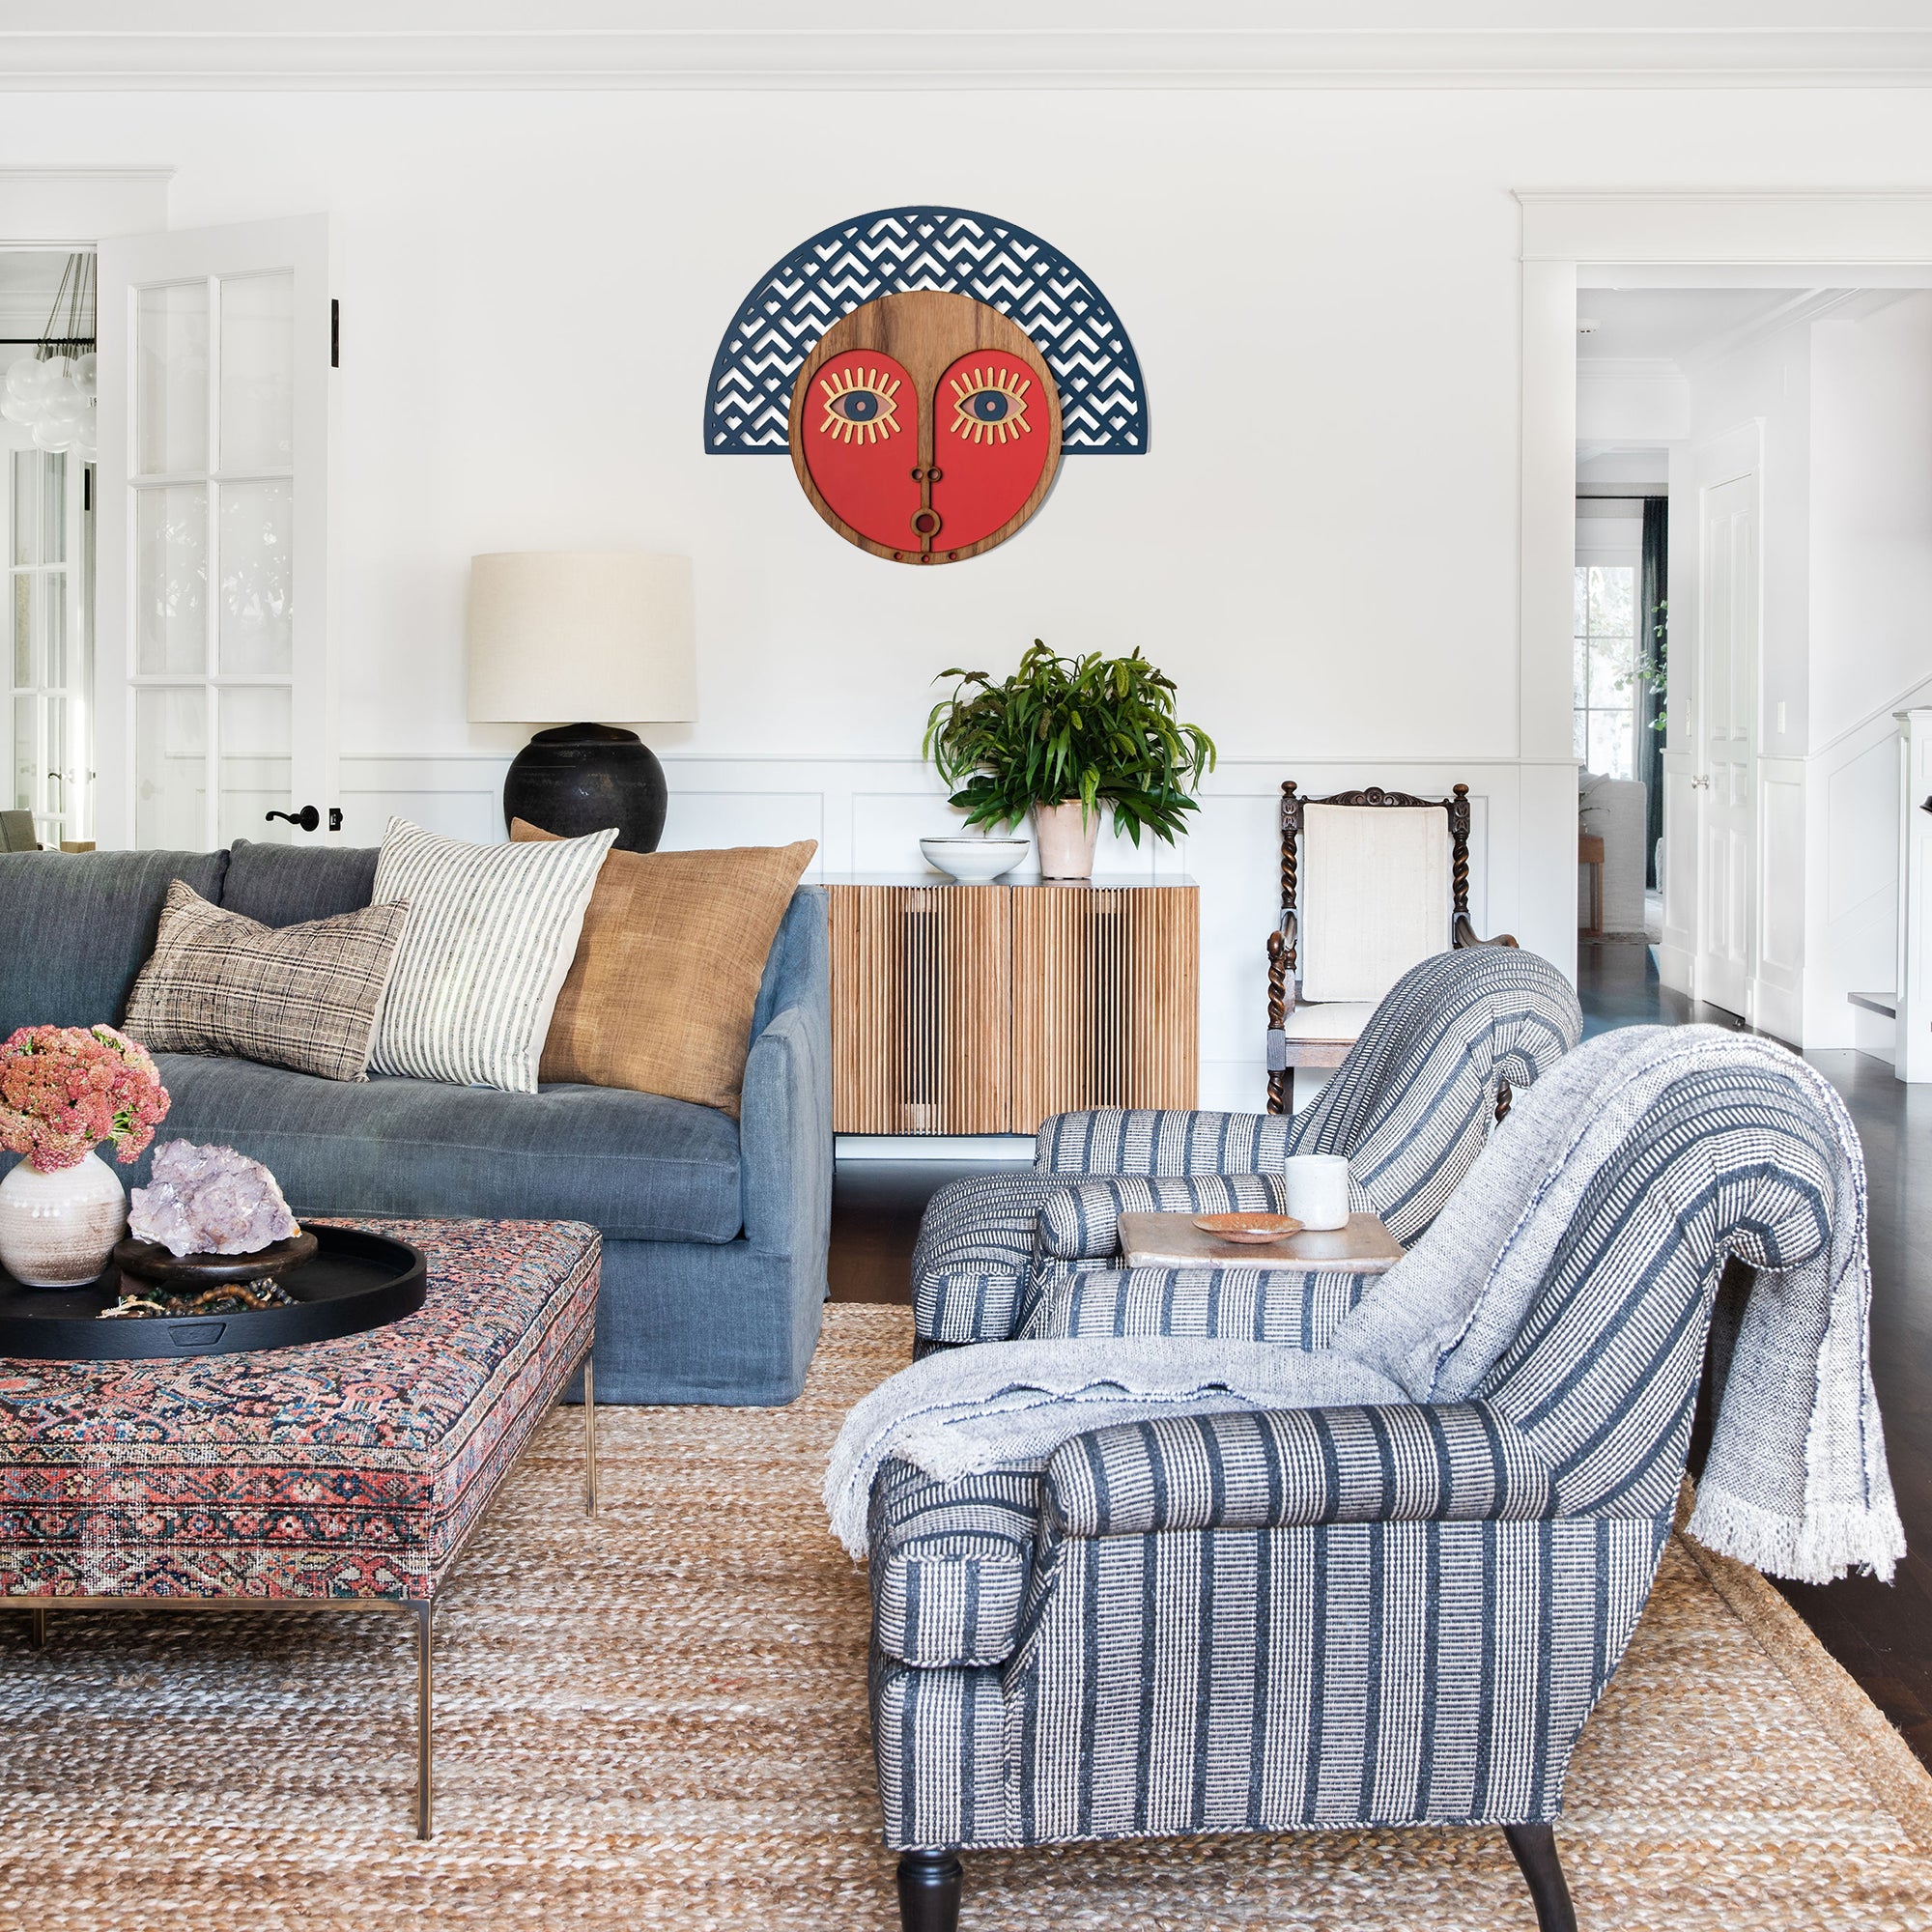 Wall Hanging on the Wooden Abstract Face to Boho Wall Decor